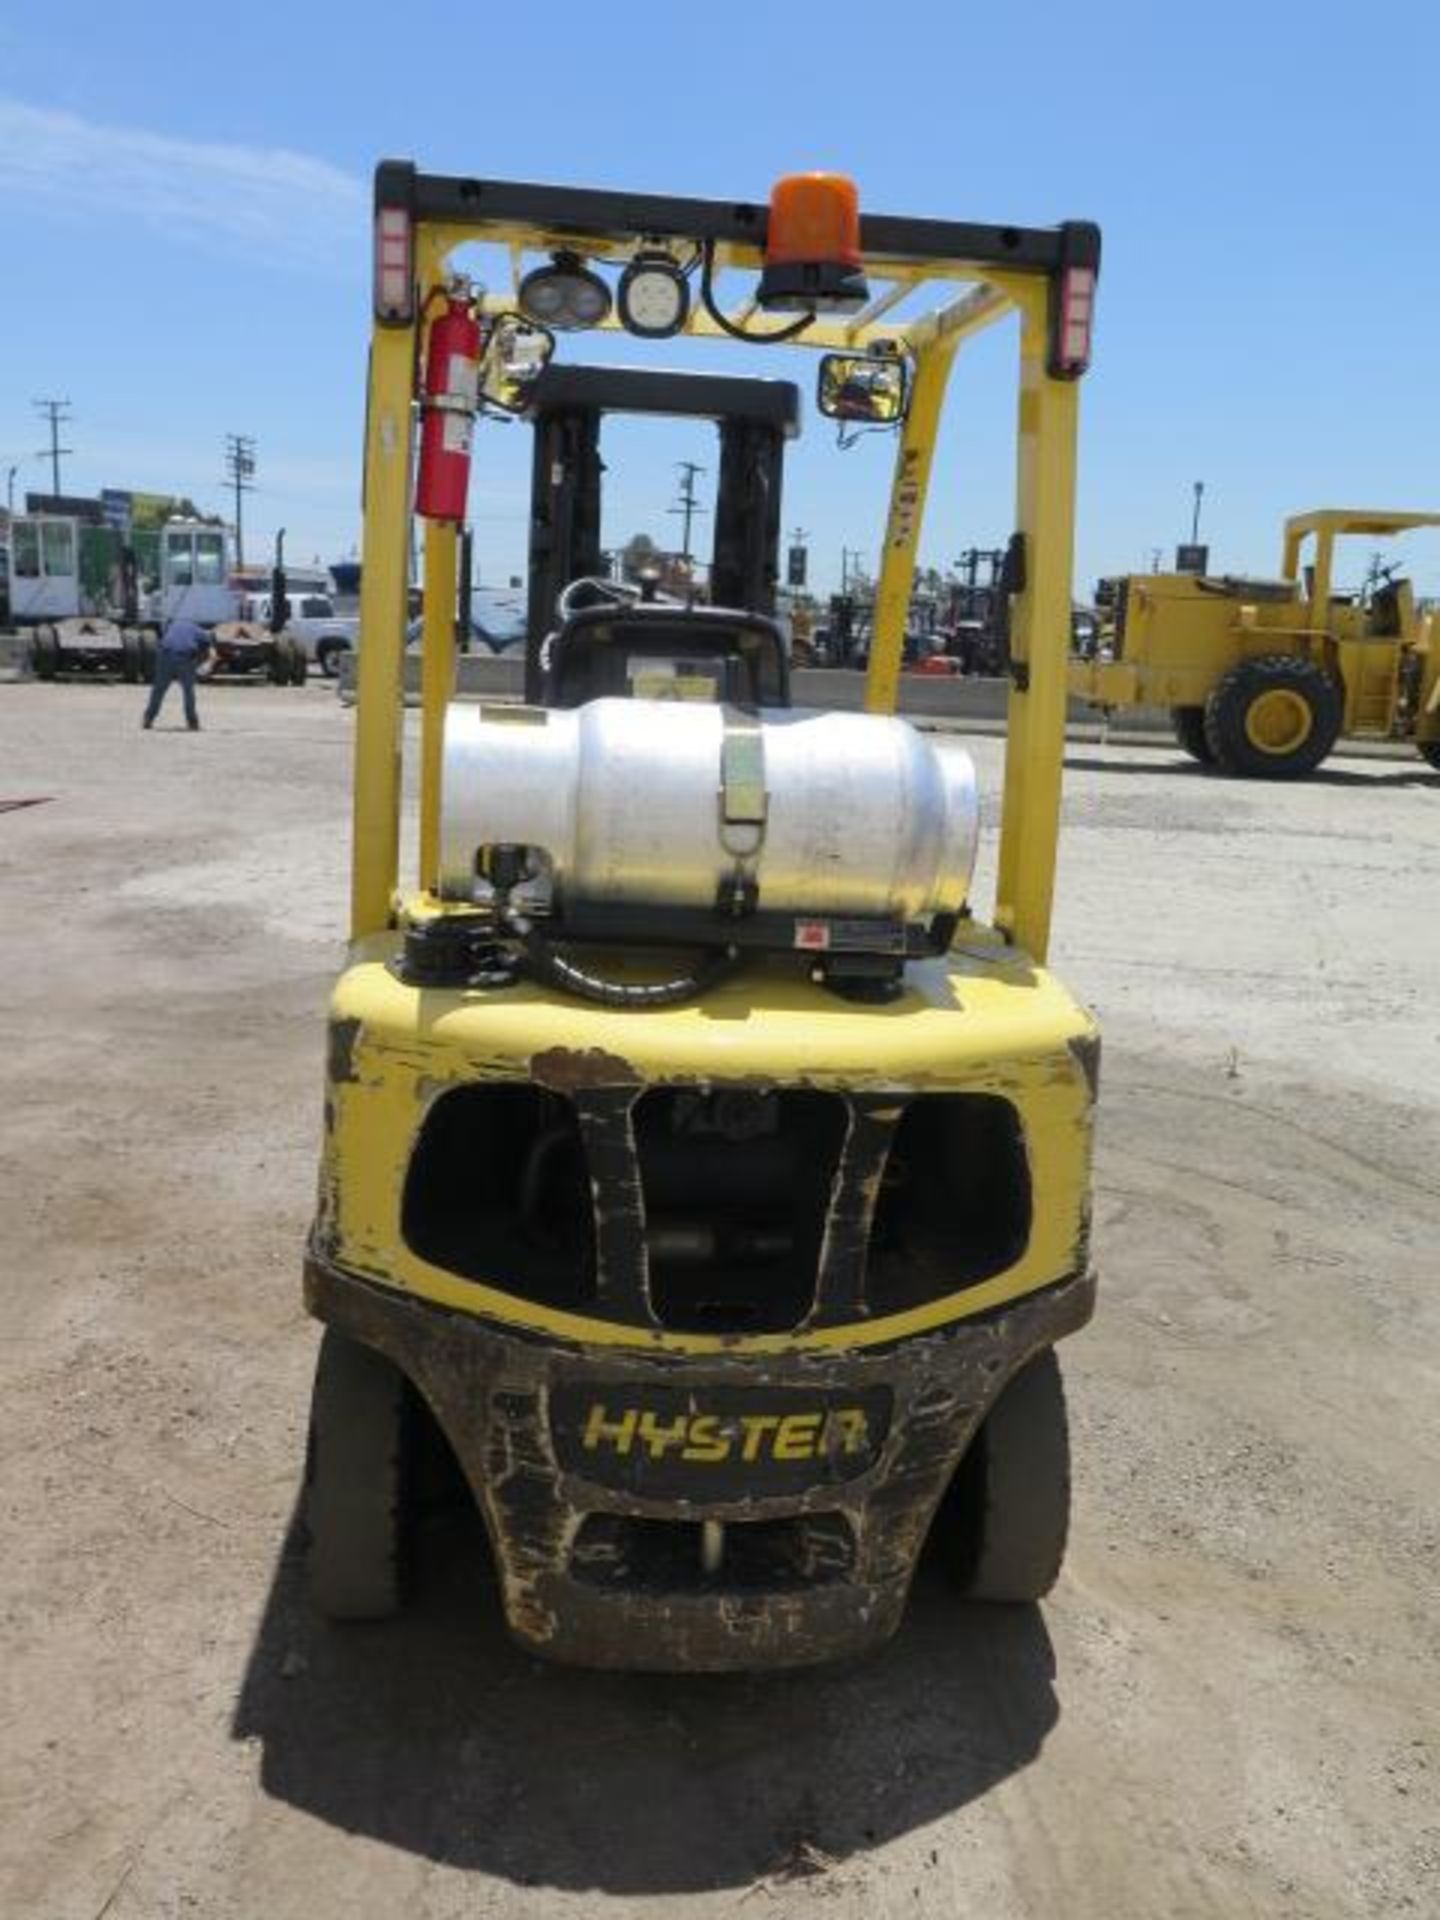 2018 Hyster H50FT 5000 Lb LPG Forklift s/n P177V06250 w/ 3-Stage, 189” Lift, Side Shift, SOLD AS IS - Image 11 of 24